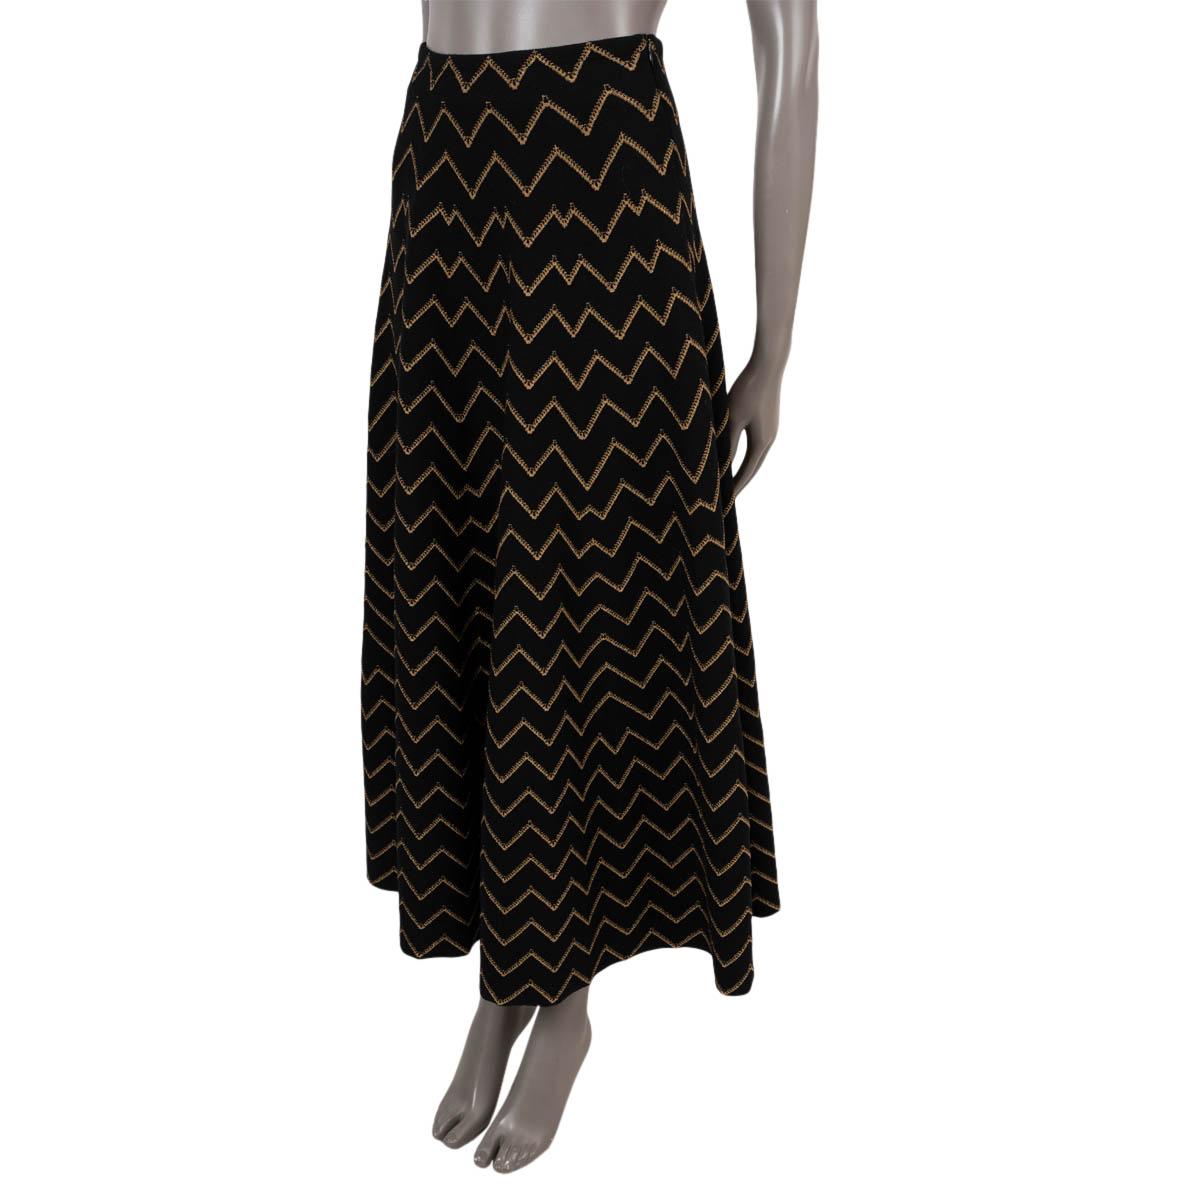 100% authentic Alaia Nazaré chevron draped midi skirt in black and gold wool (46%), viscose (24%), nylon (20%), metal (6%) and elastane (4%). Opens with a concealed zipper and a hook in the back. Has been worn and is in excellent condition.

2019